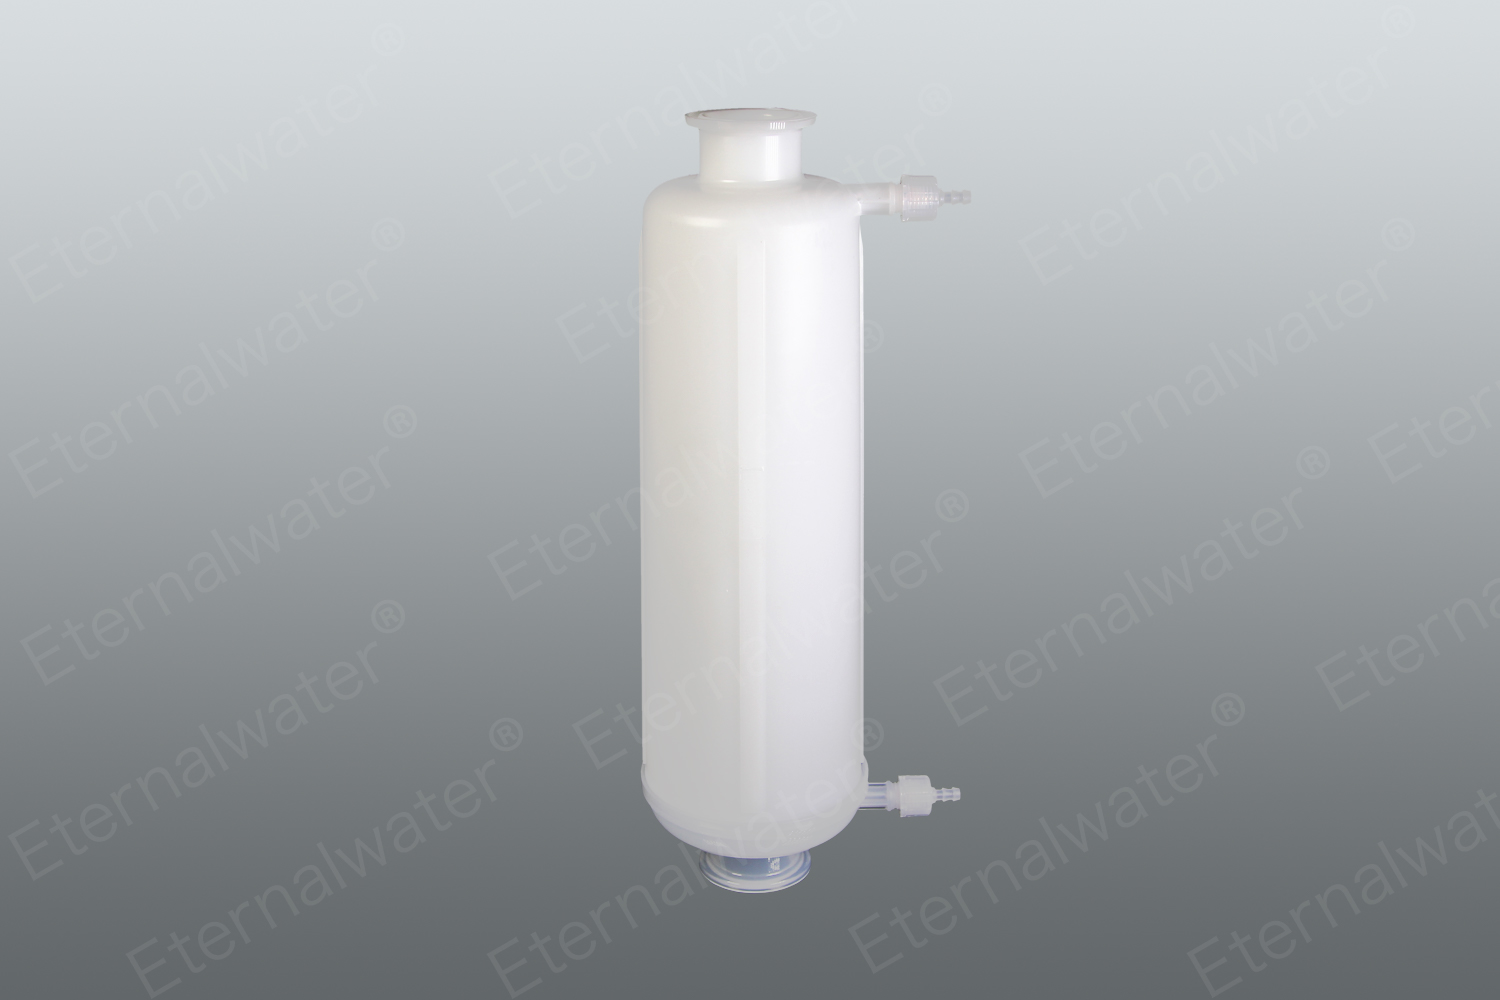 What is the difference between capsule filter and cartridge filter?